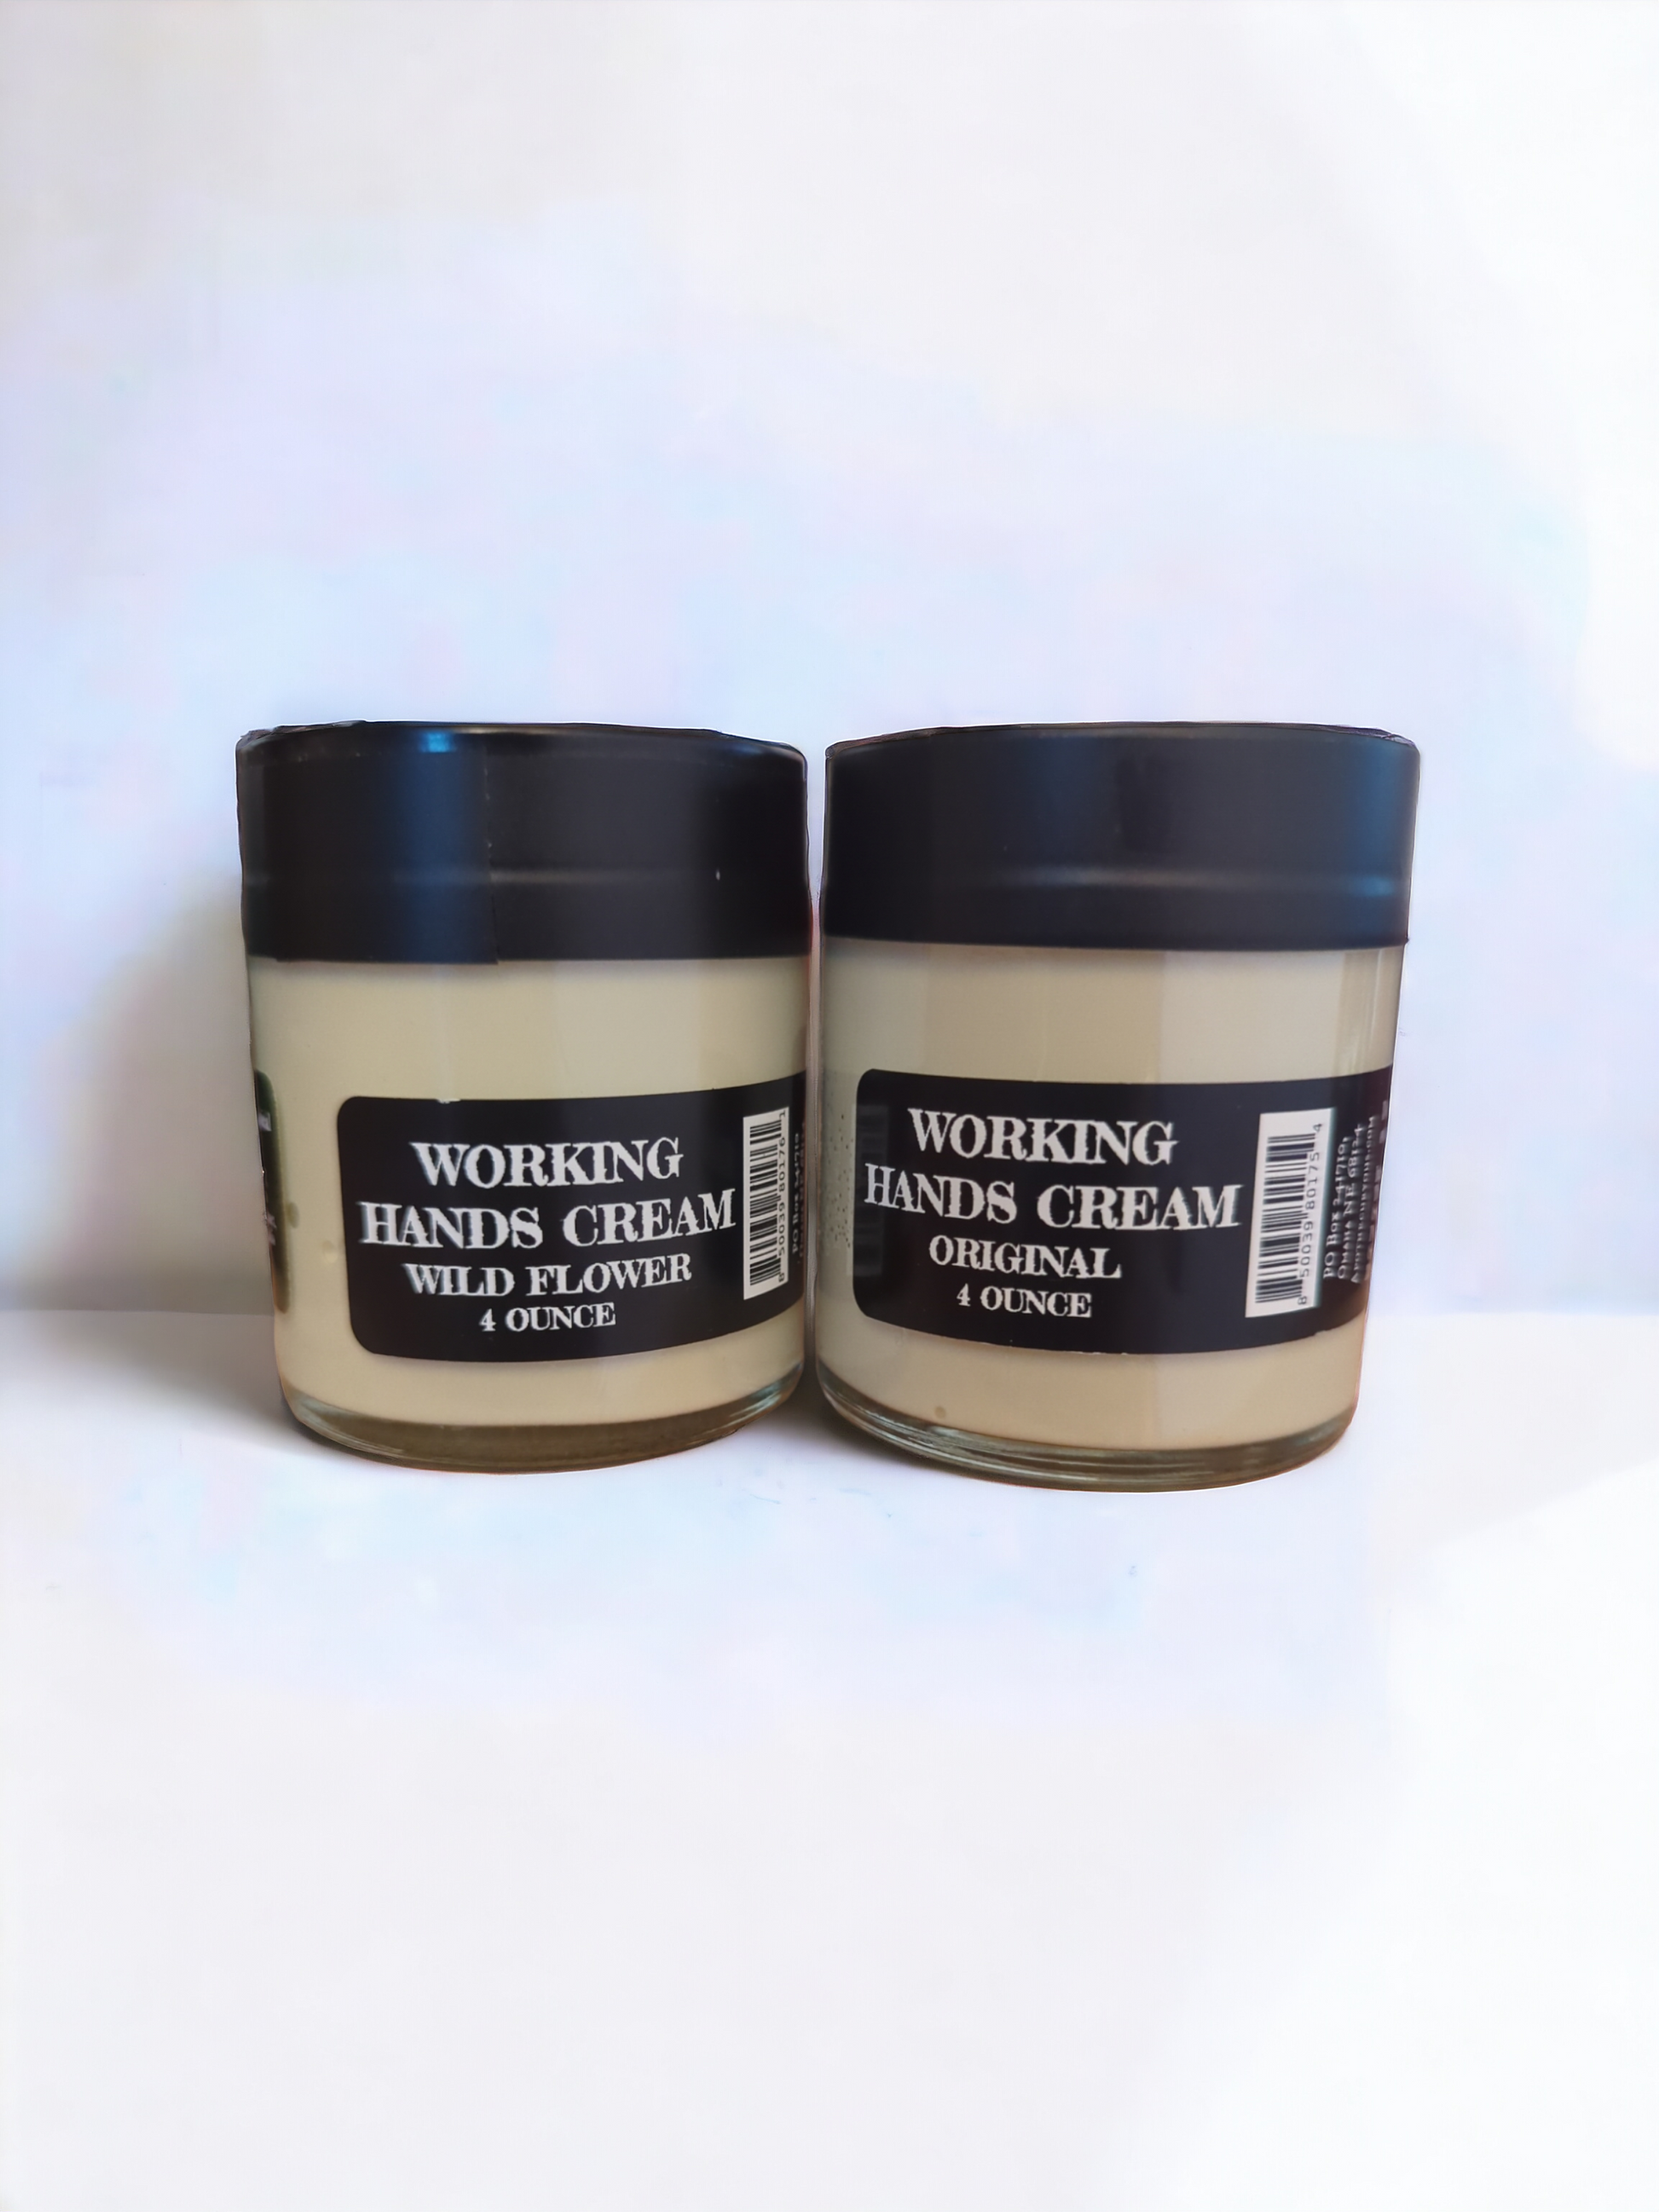 Working Hands cream, 4 ounce glass, 2 scents, Apothecuryous